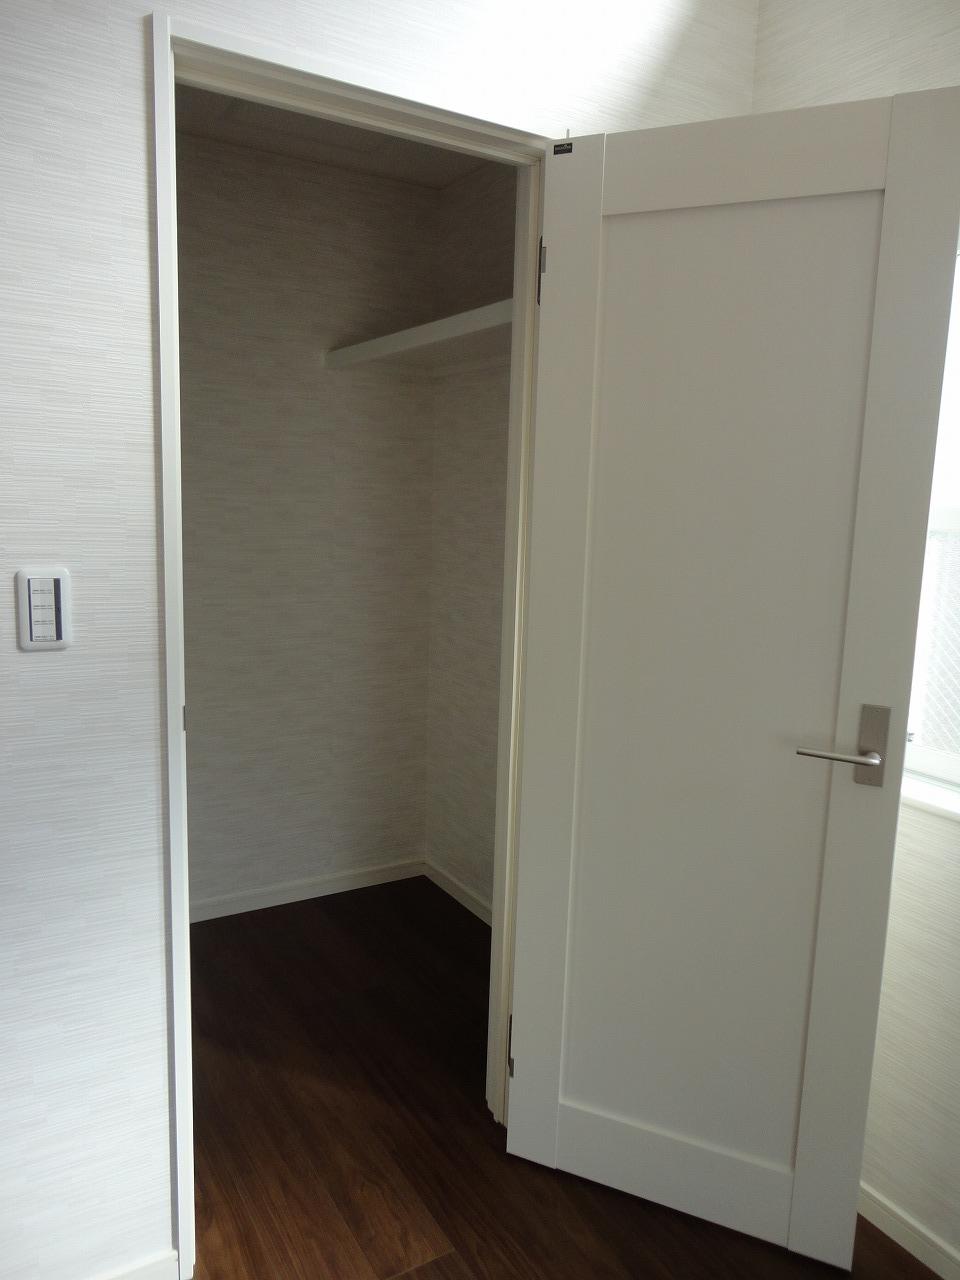 Same specifications photos (Other introspection). Walk-in closet construction cases